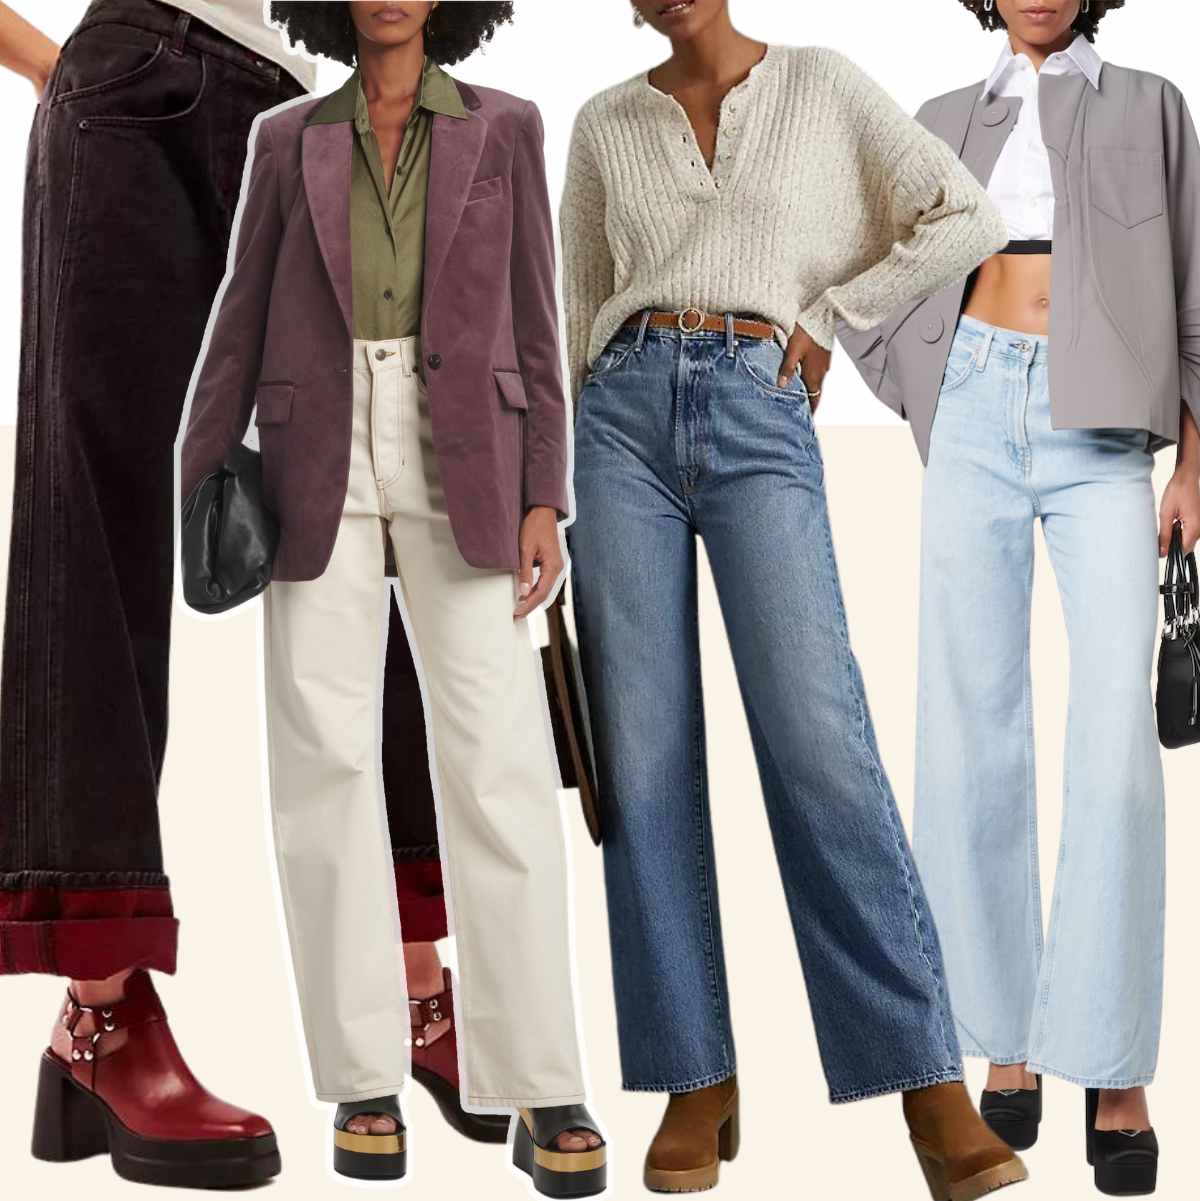 Collage of 4 women wearing different Platform shoes with wide leg jeans.